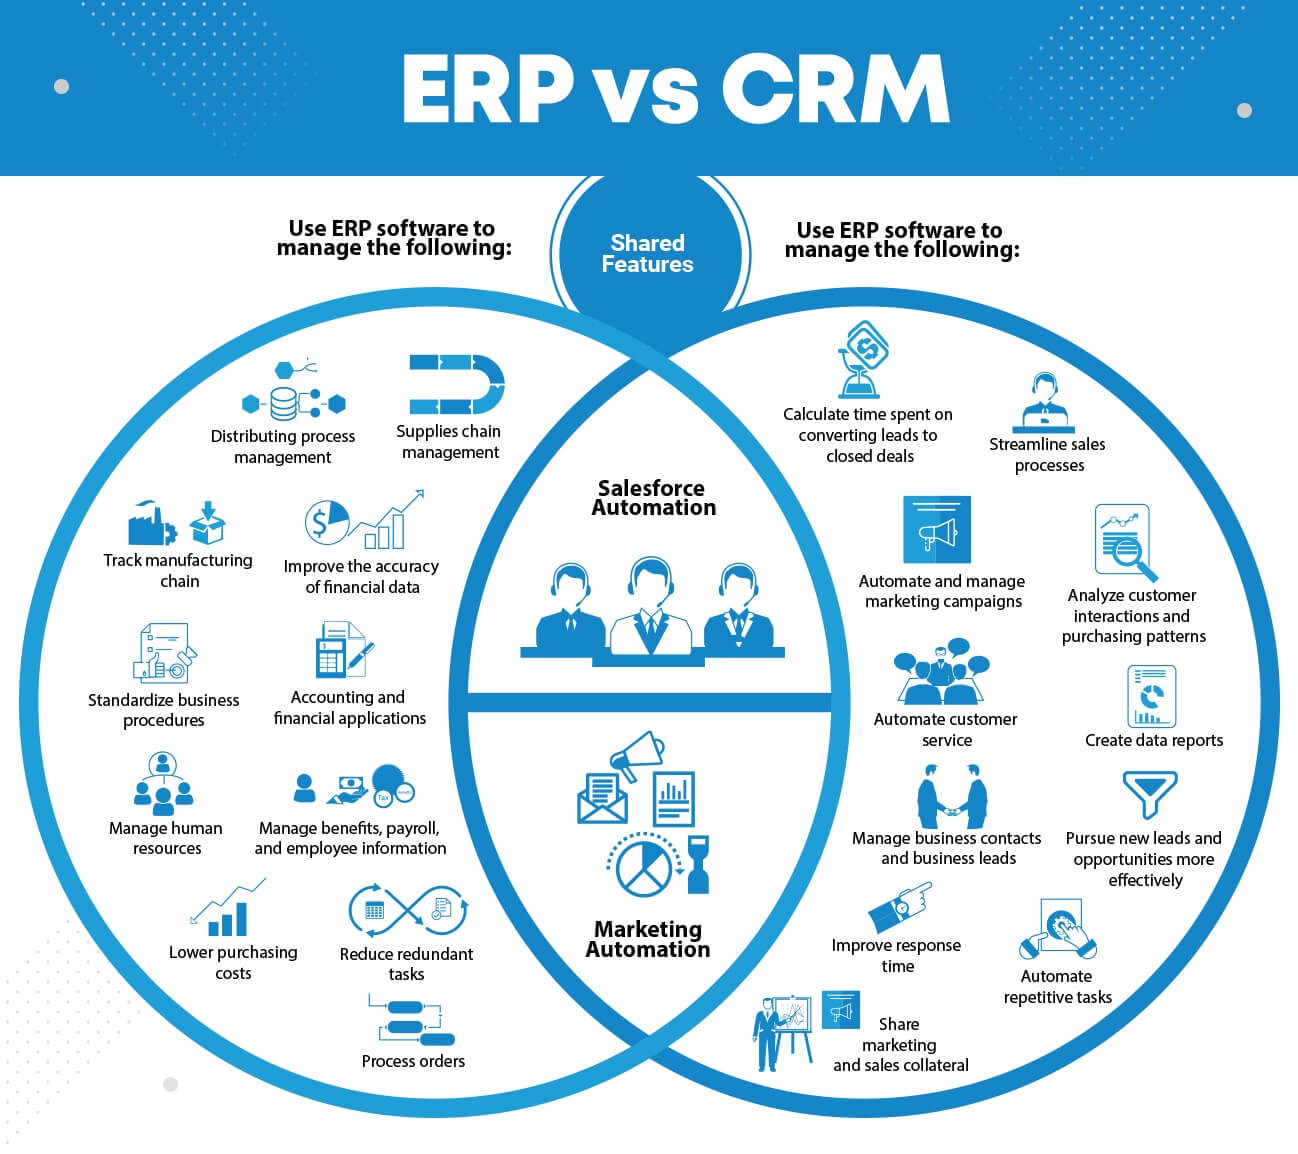 ERP vs CRM Shared Features